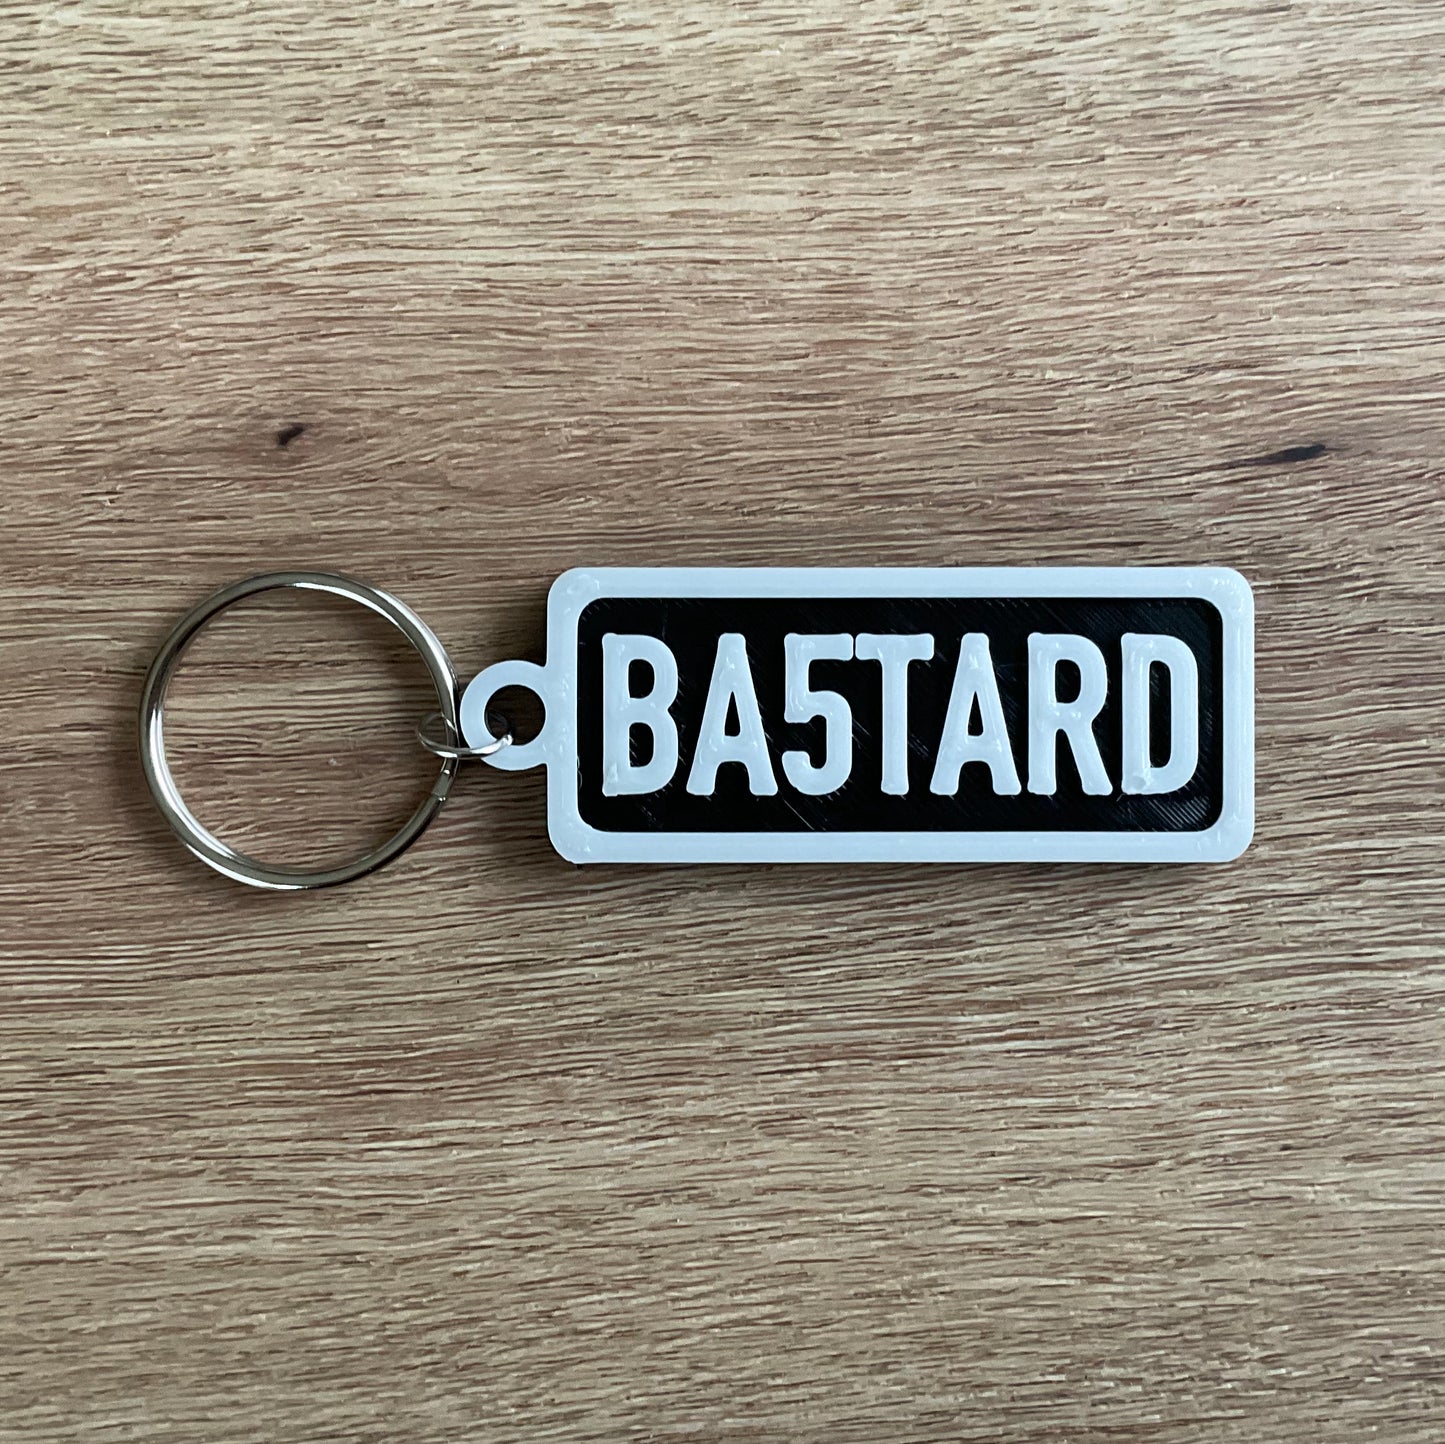 An Image of the White on Black version of the Bastard Keychain.